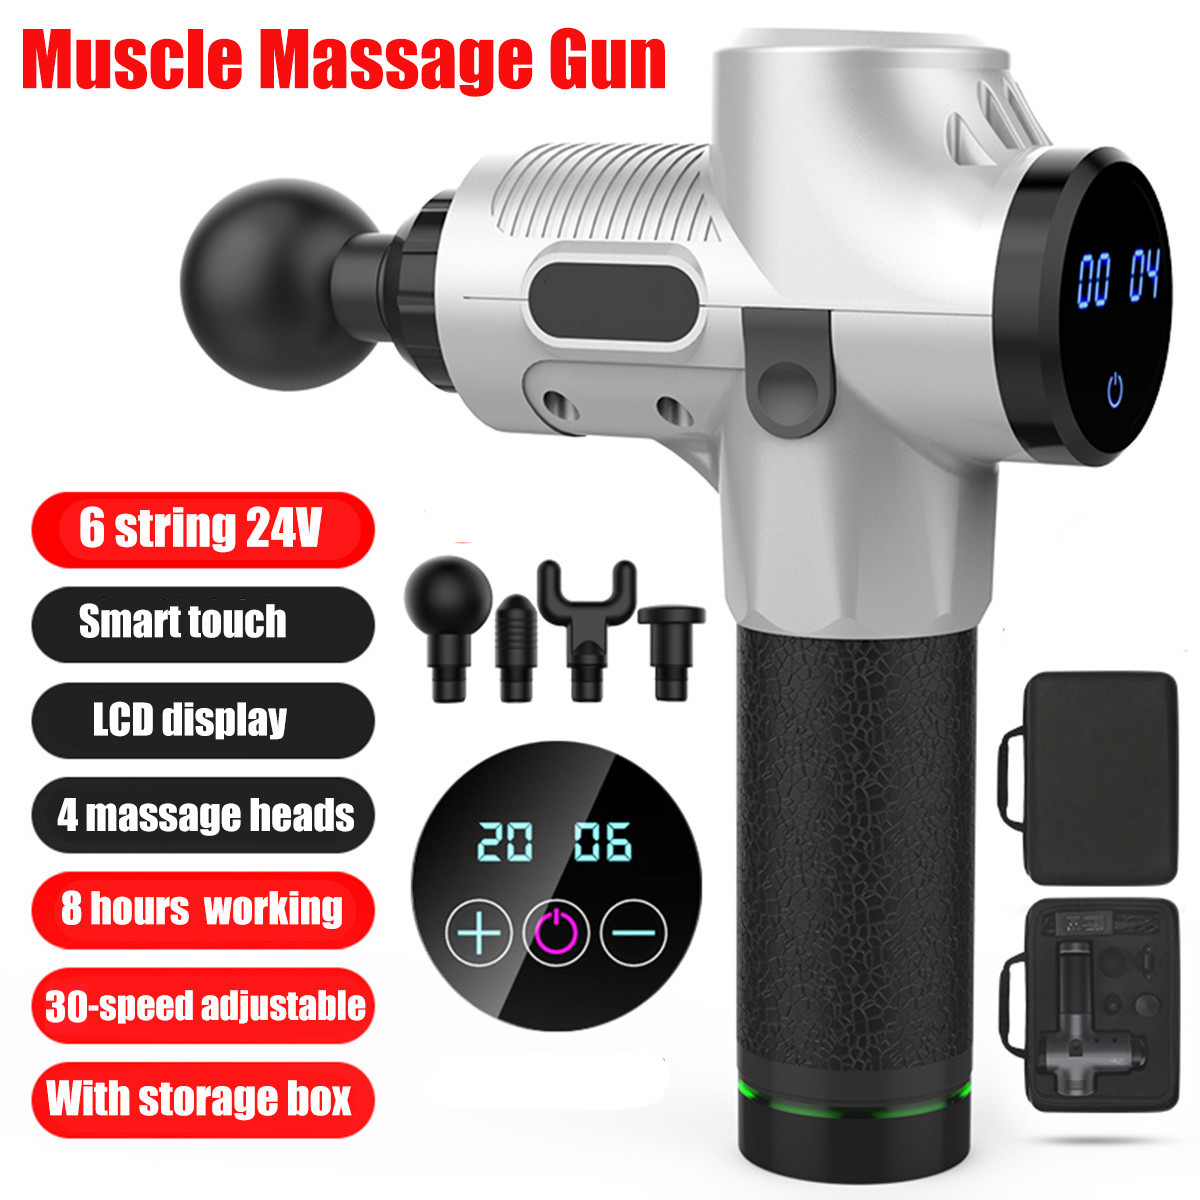 2500mAh Electric Massager Muscle Massage Therapy Vibration G un Deep Tissue Display Cordless Percussion Massager Percussion Massage Device 14